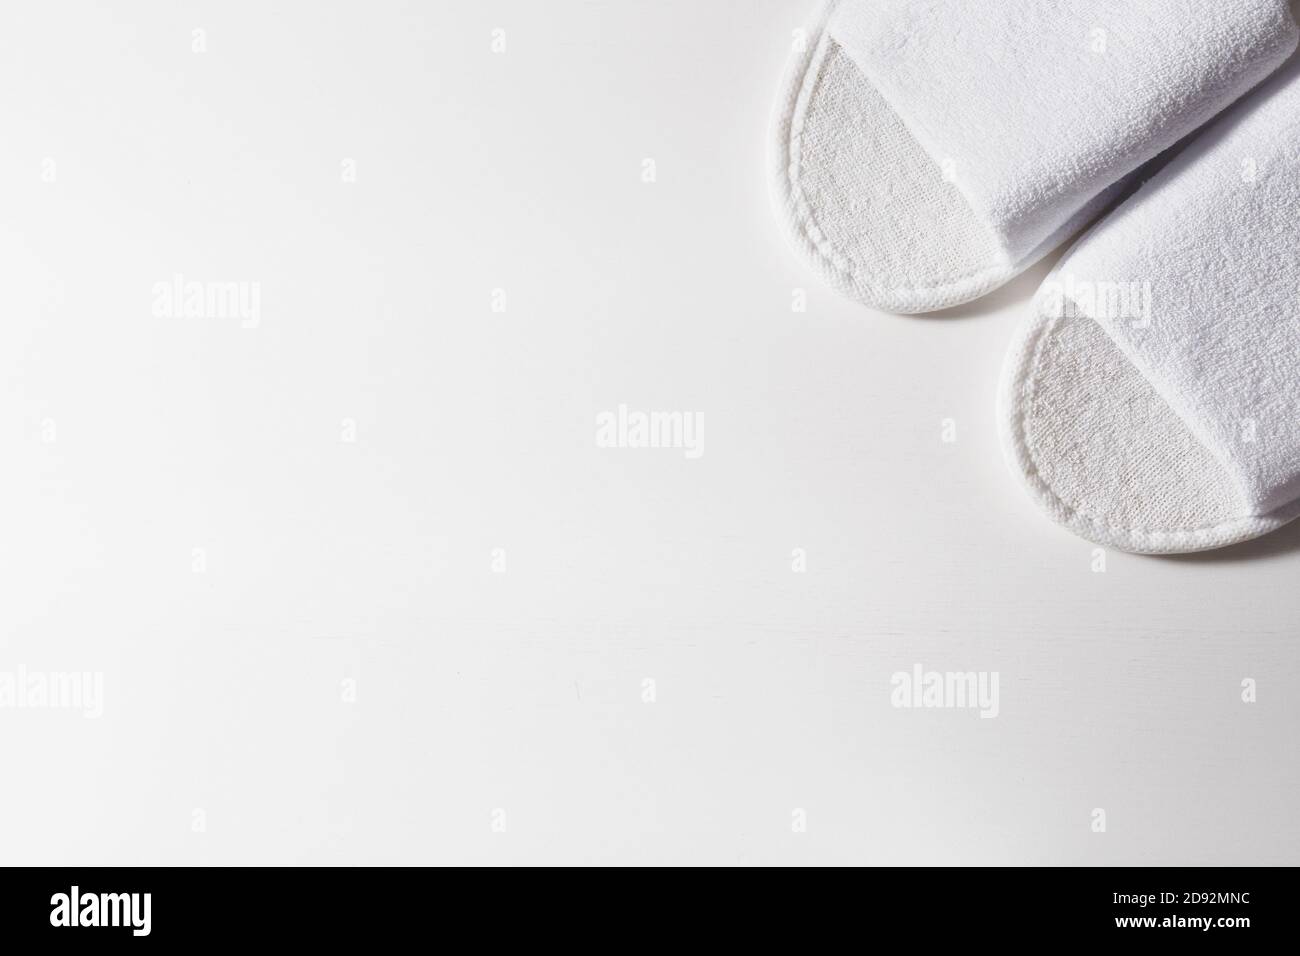 Top view of white slippers on a white wooden background. Copy space for text. Stock Photo